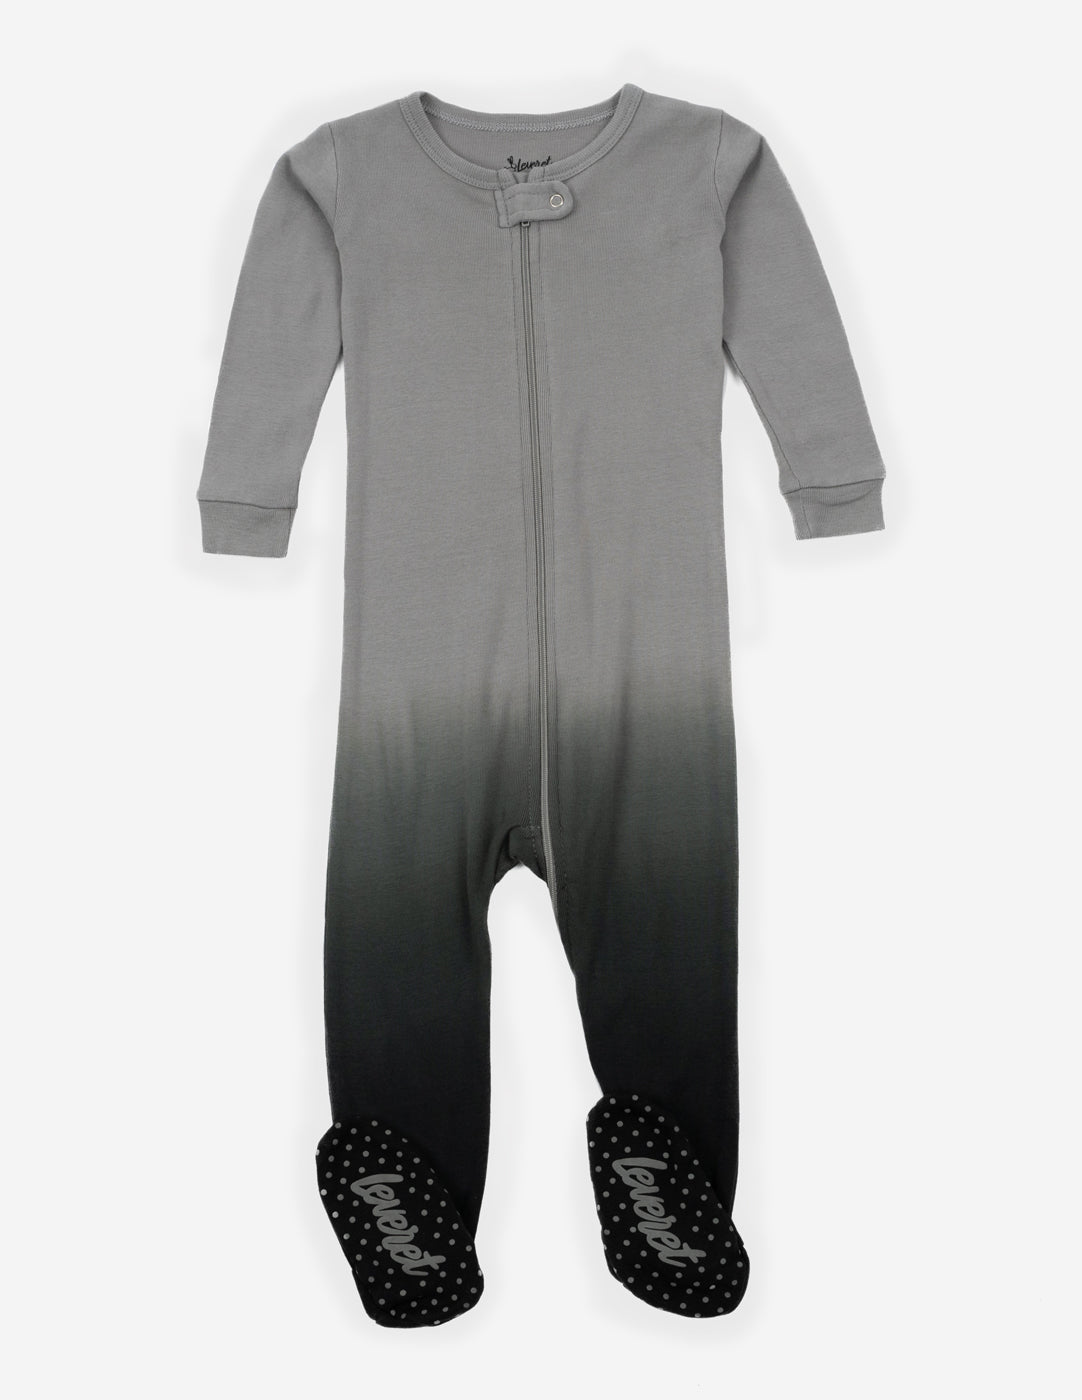 Baby Footed Ombré Dye Cotton Pajamas